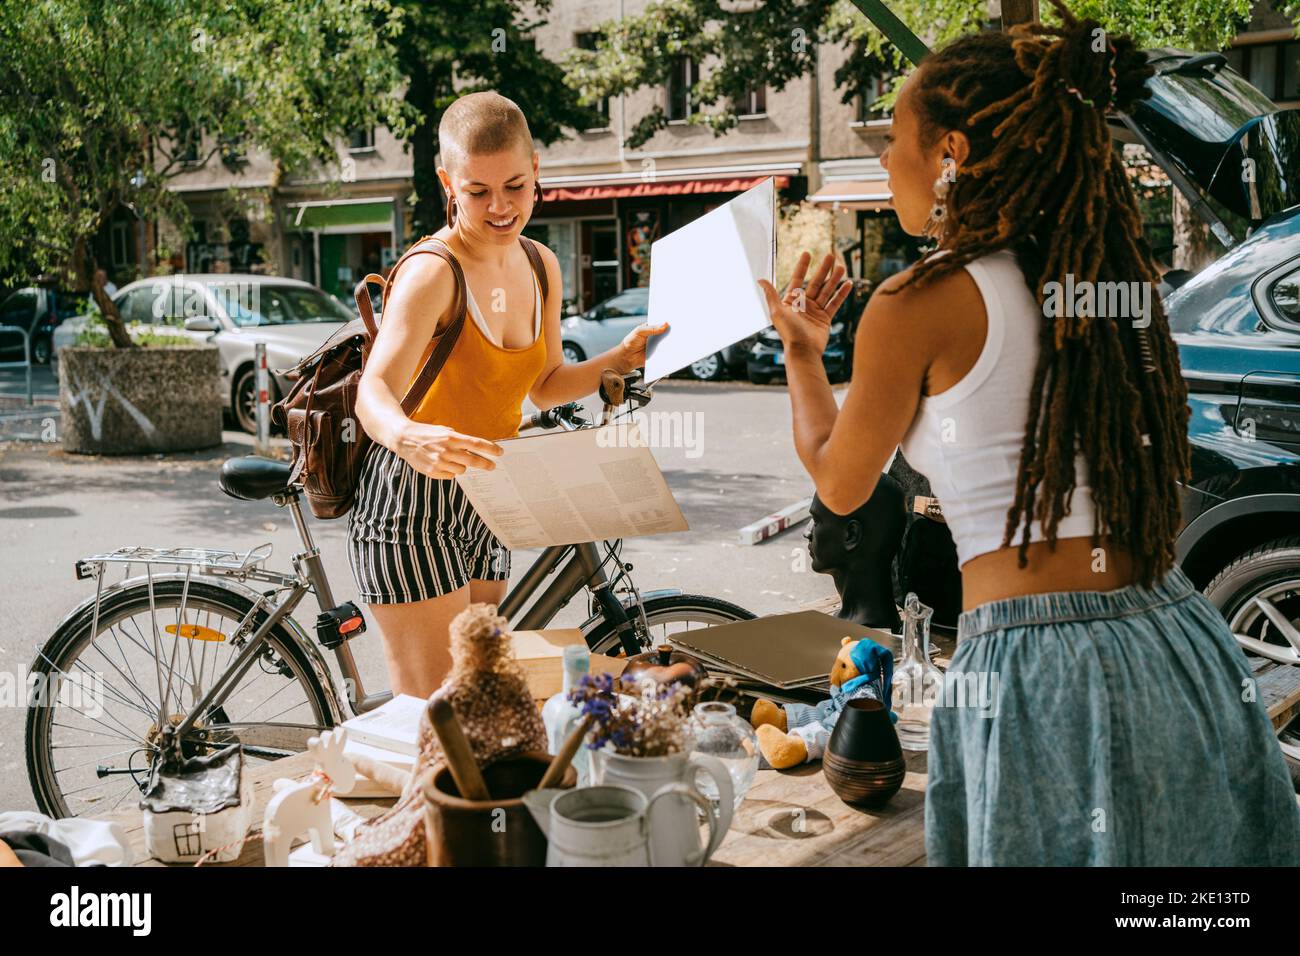 Female owner communicating with customer holding records while shopping at flea market Stock Photo